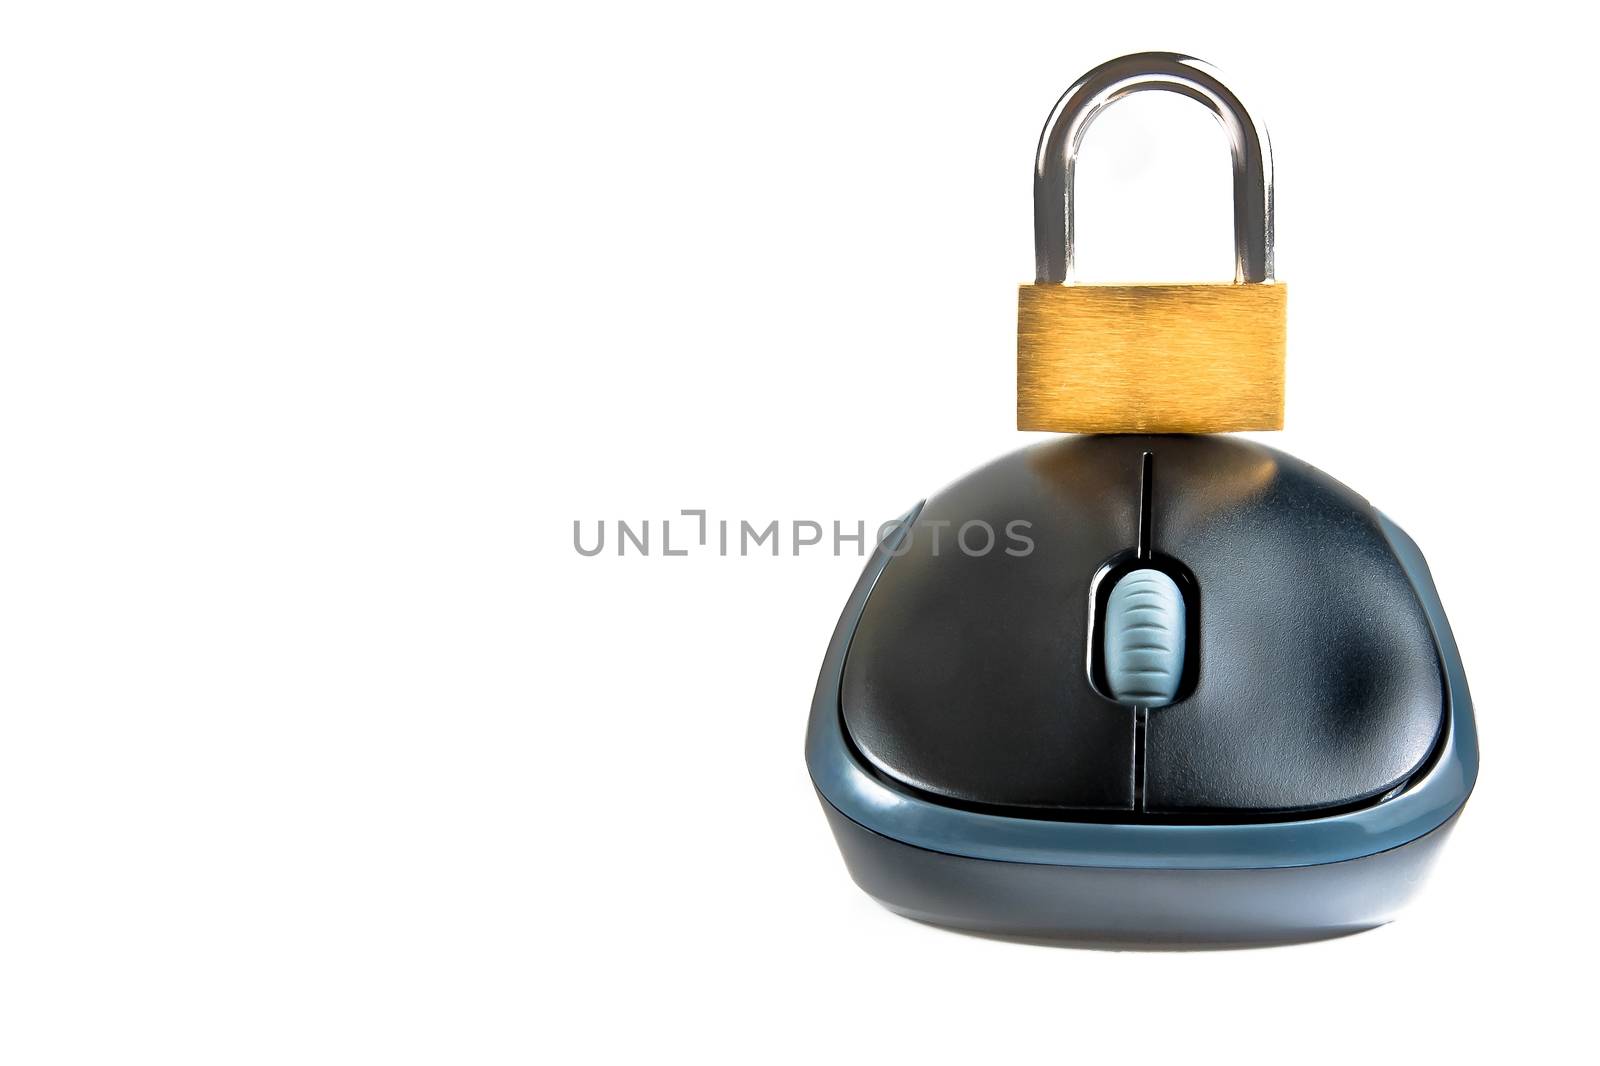 mouse with lock security on top on white background with space for text